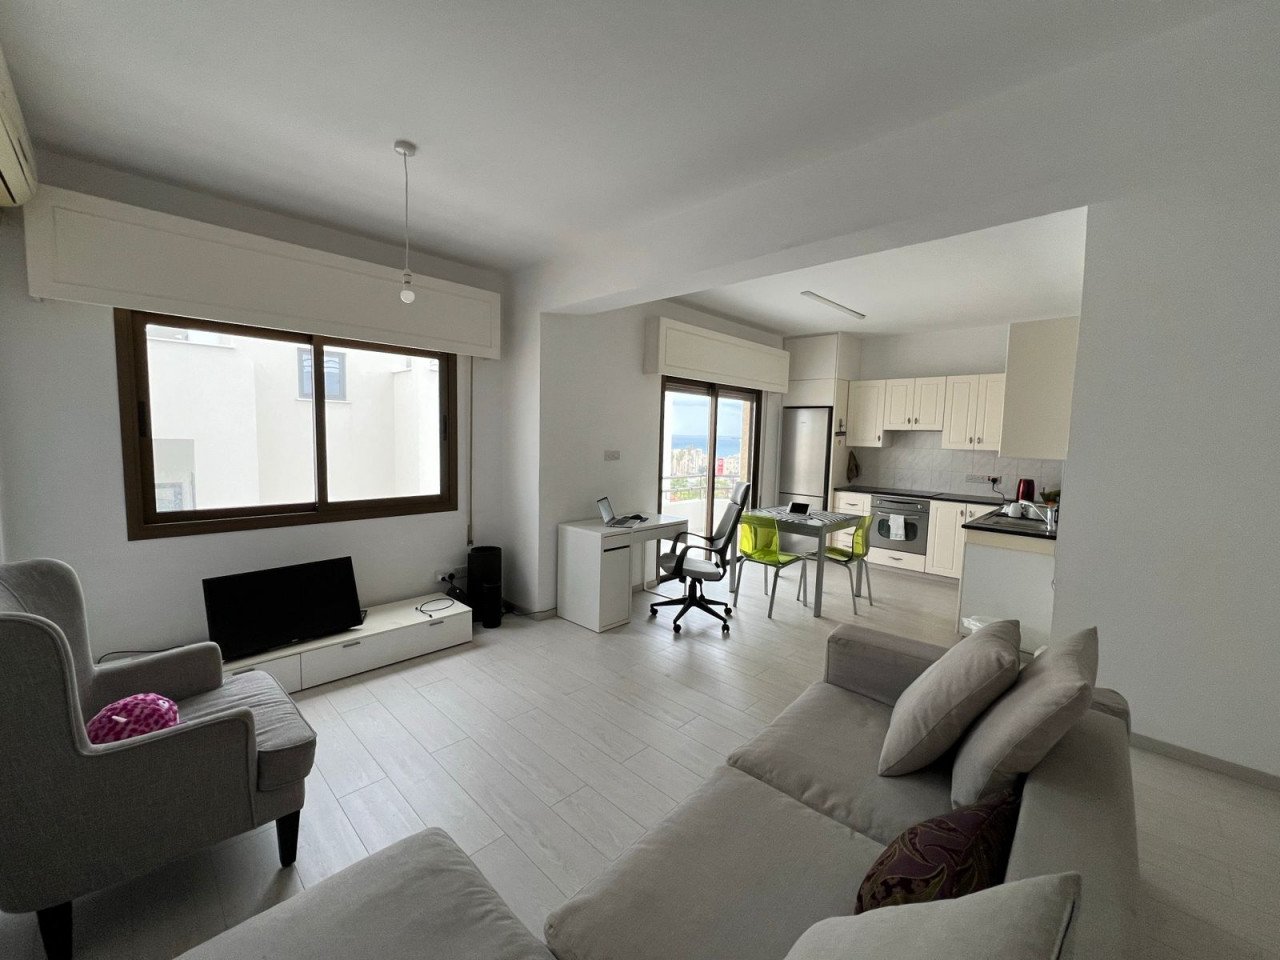 Property for Rent: Apartment (Flat) in Agios Tychonas, Limassol for Rent | Key Realtor Cyprus